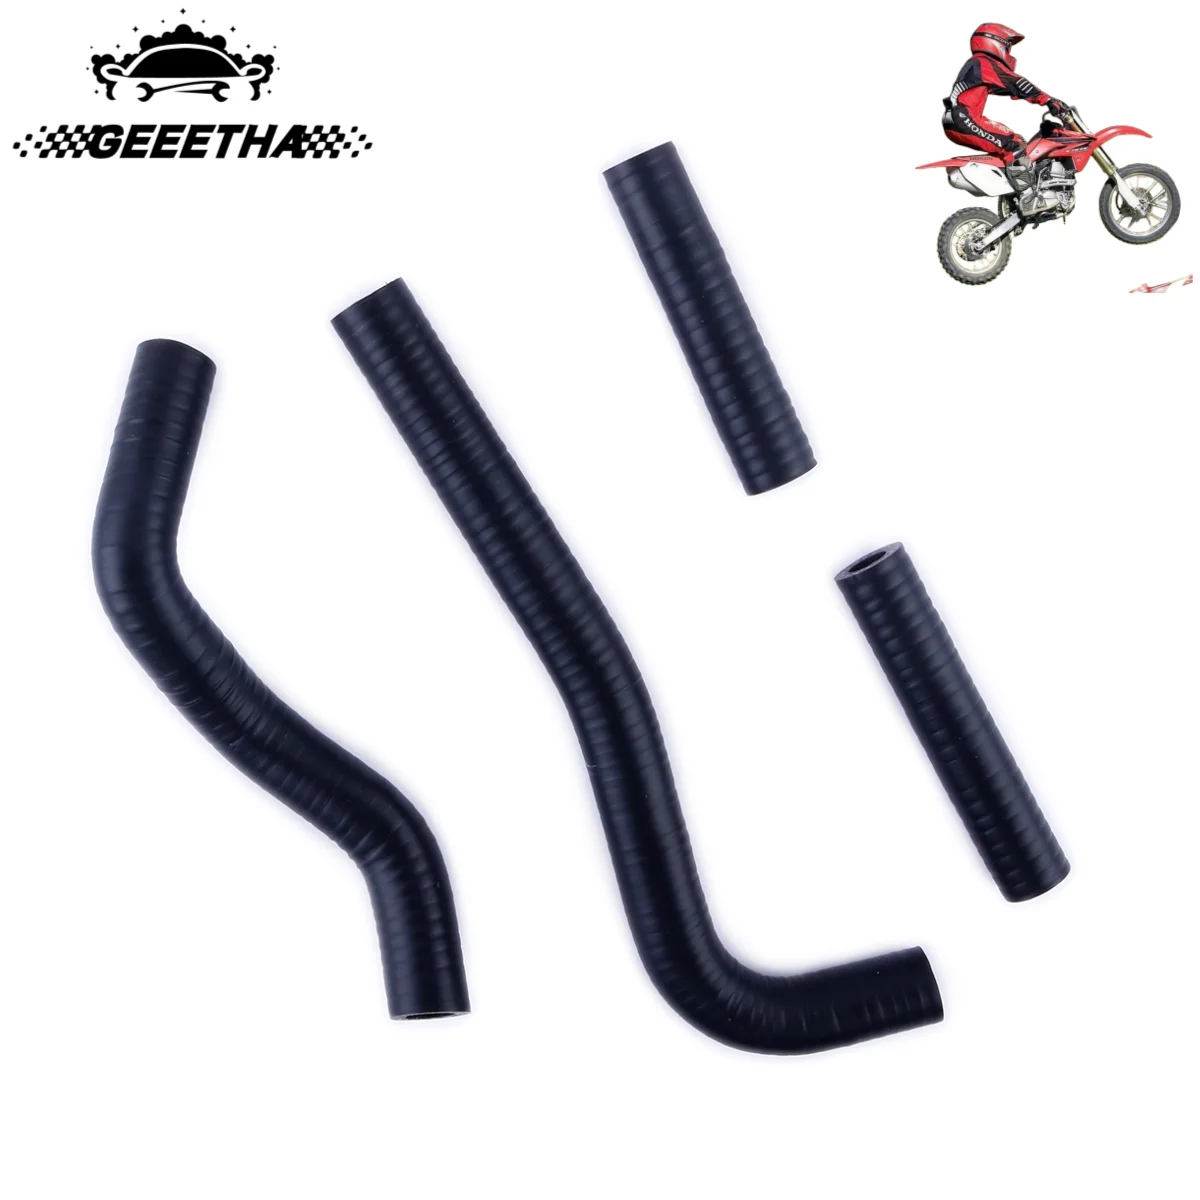 

For 2007-2020 Honda CRF150R CRF 150R CRF150RB Motorcycle Silicone Radiator Coolant Hose Pipe Kit